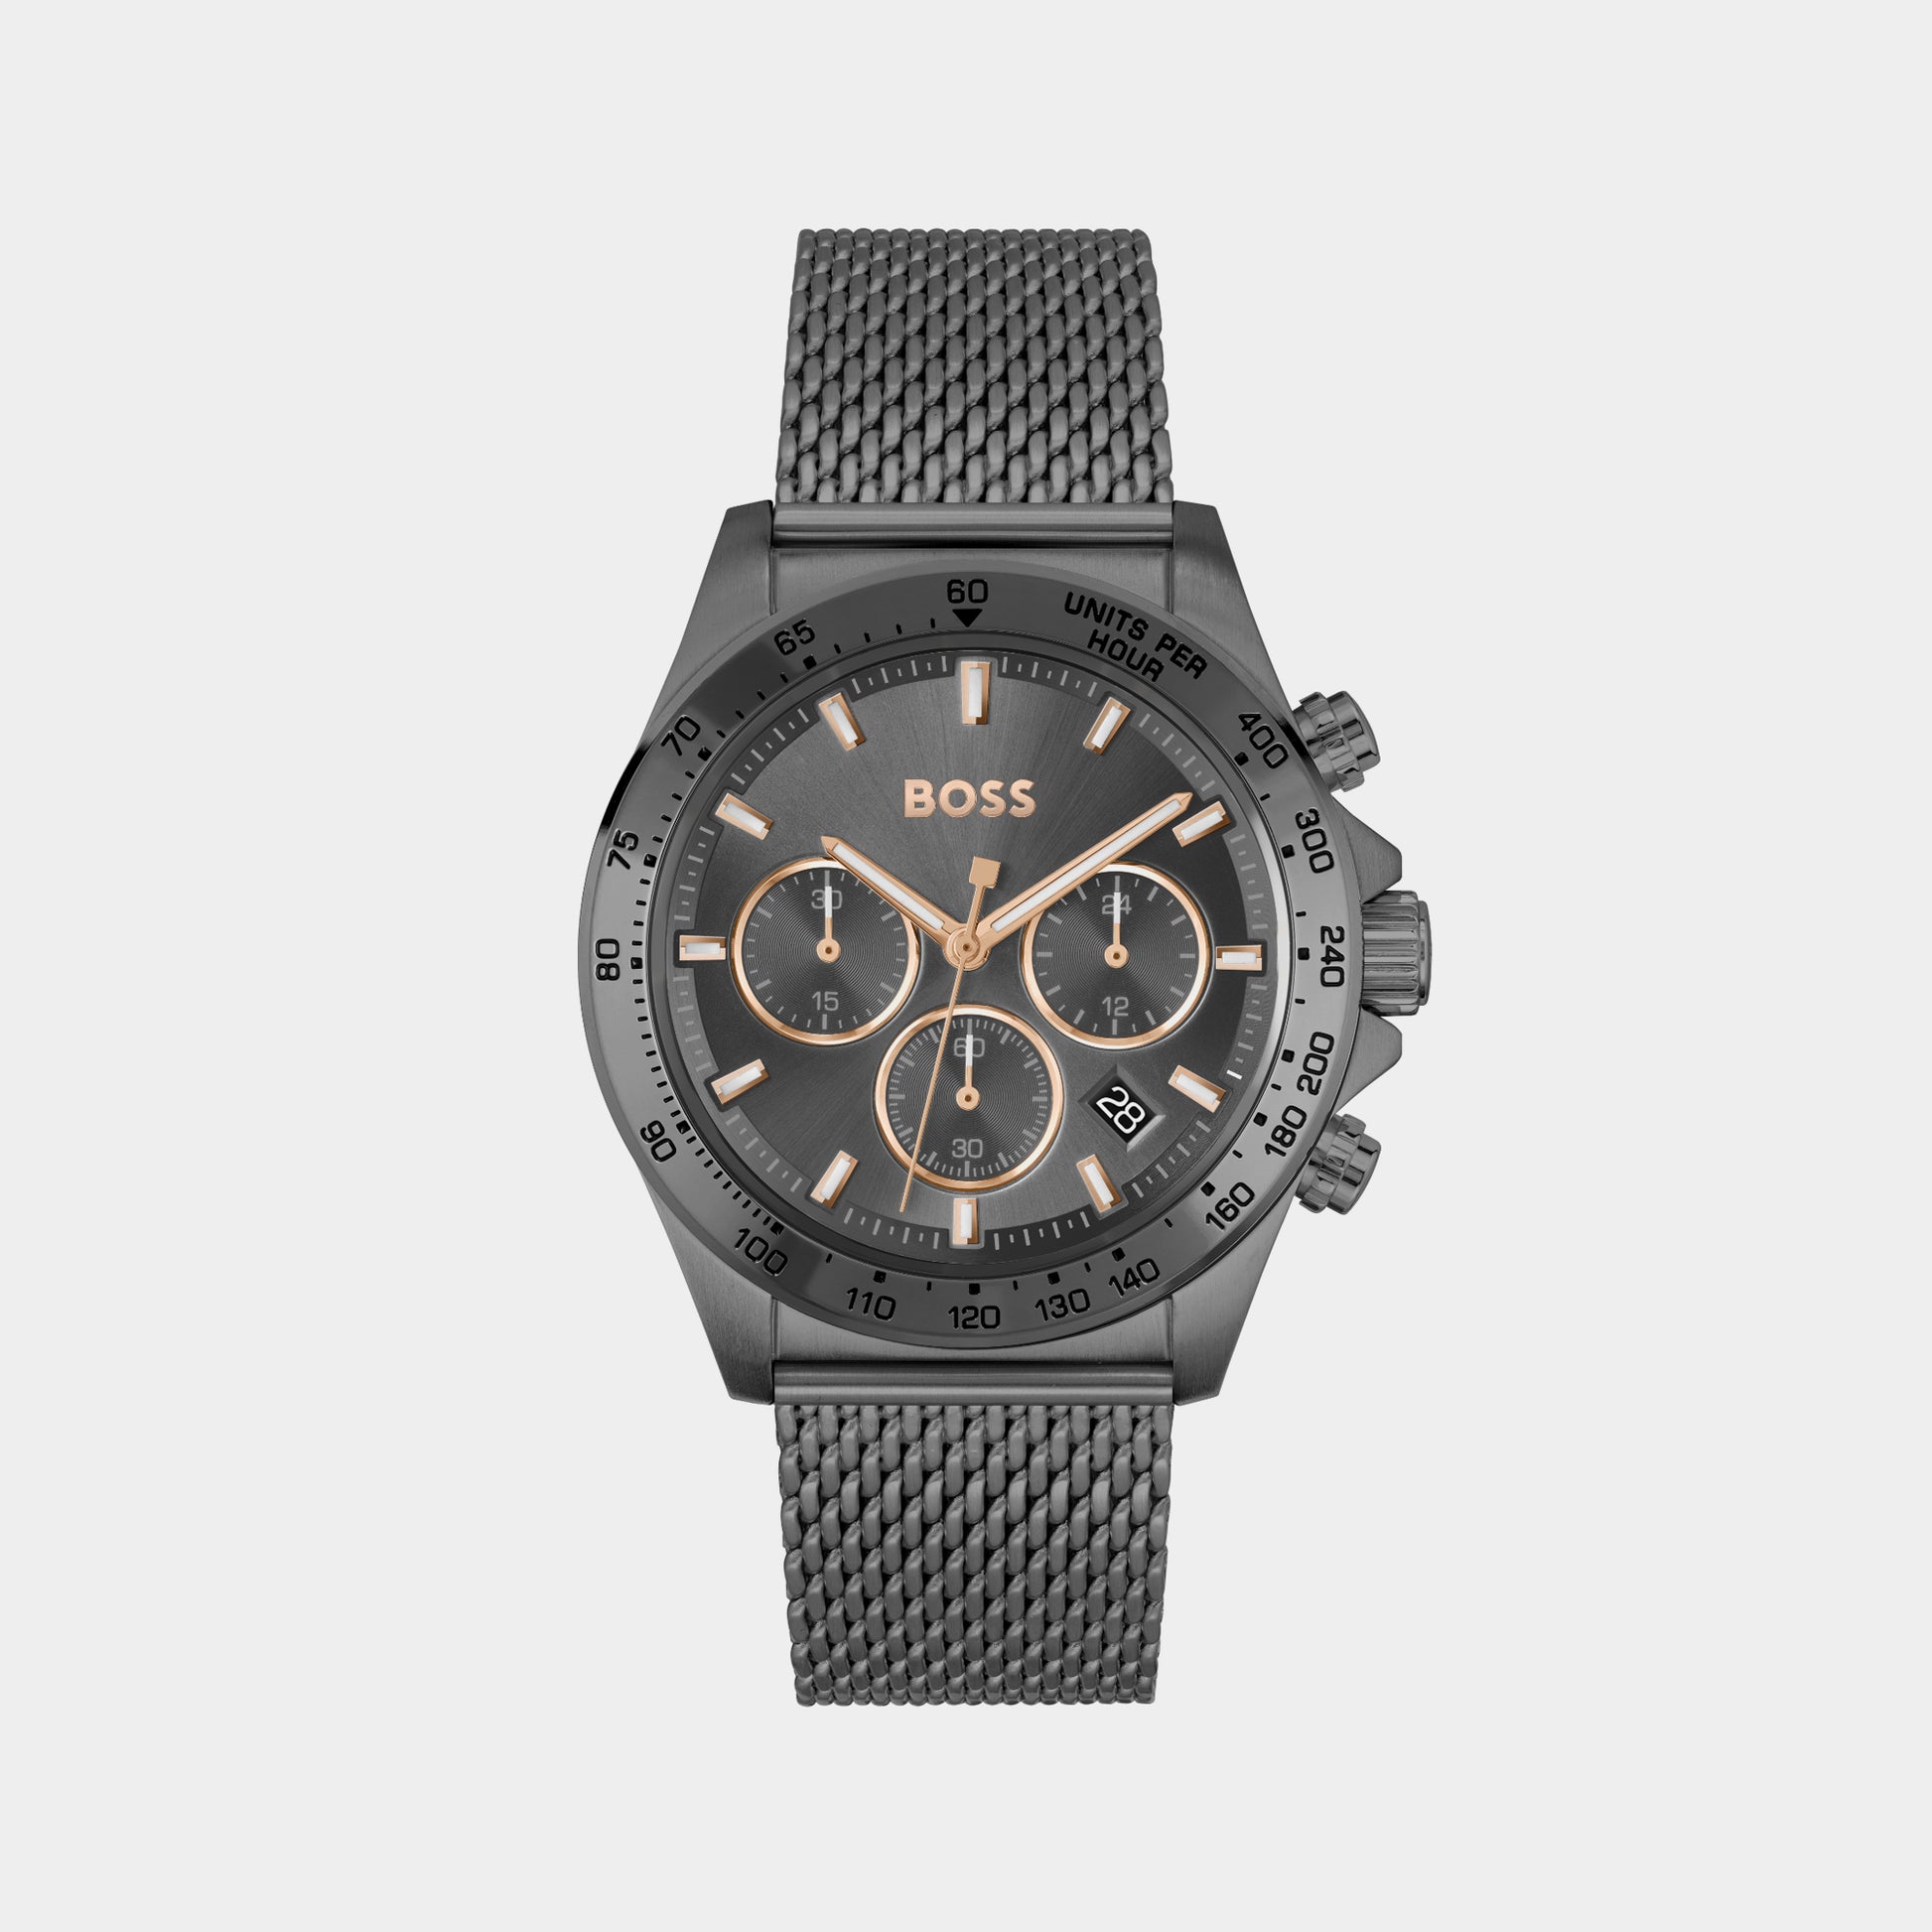 Hero Male Grey Chronograph Mesh Watch 1514021 – Just In Time